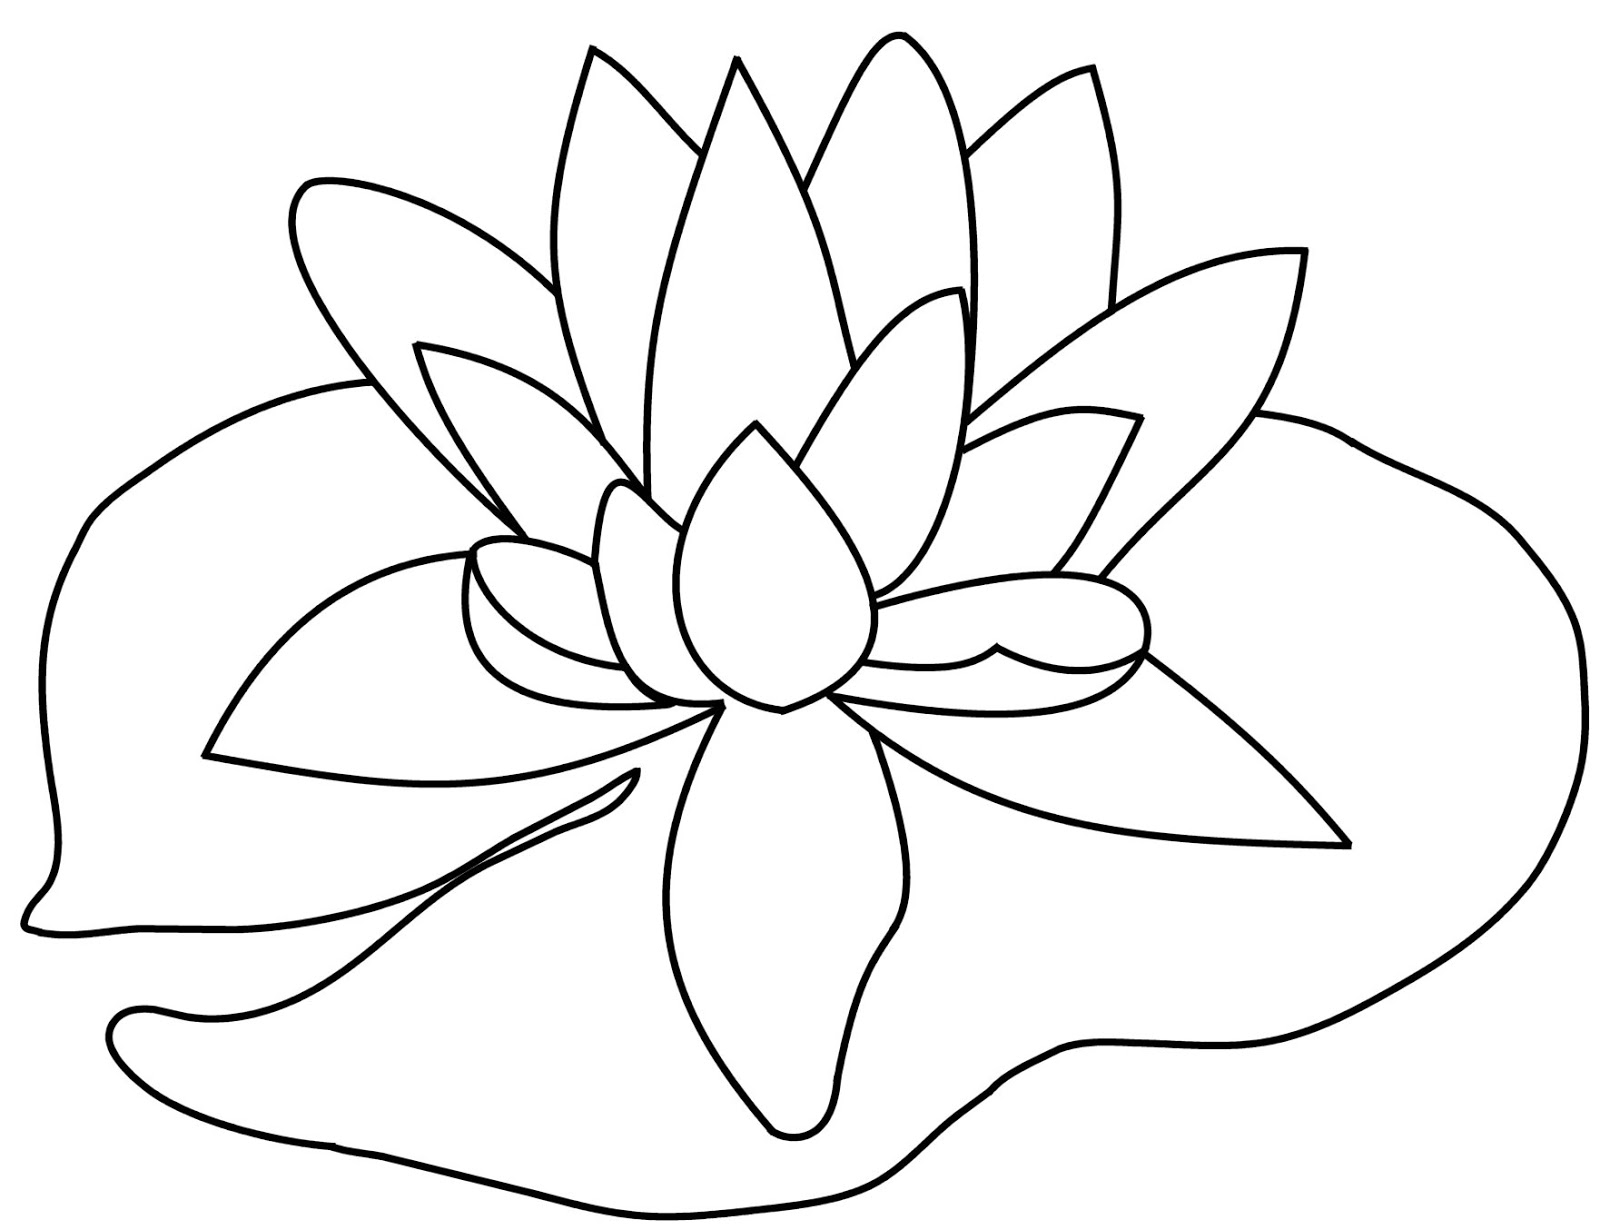 Lily Pad Template Cliparts.co